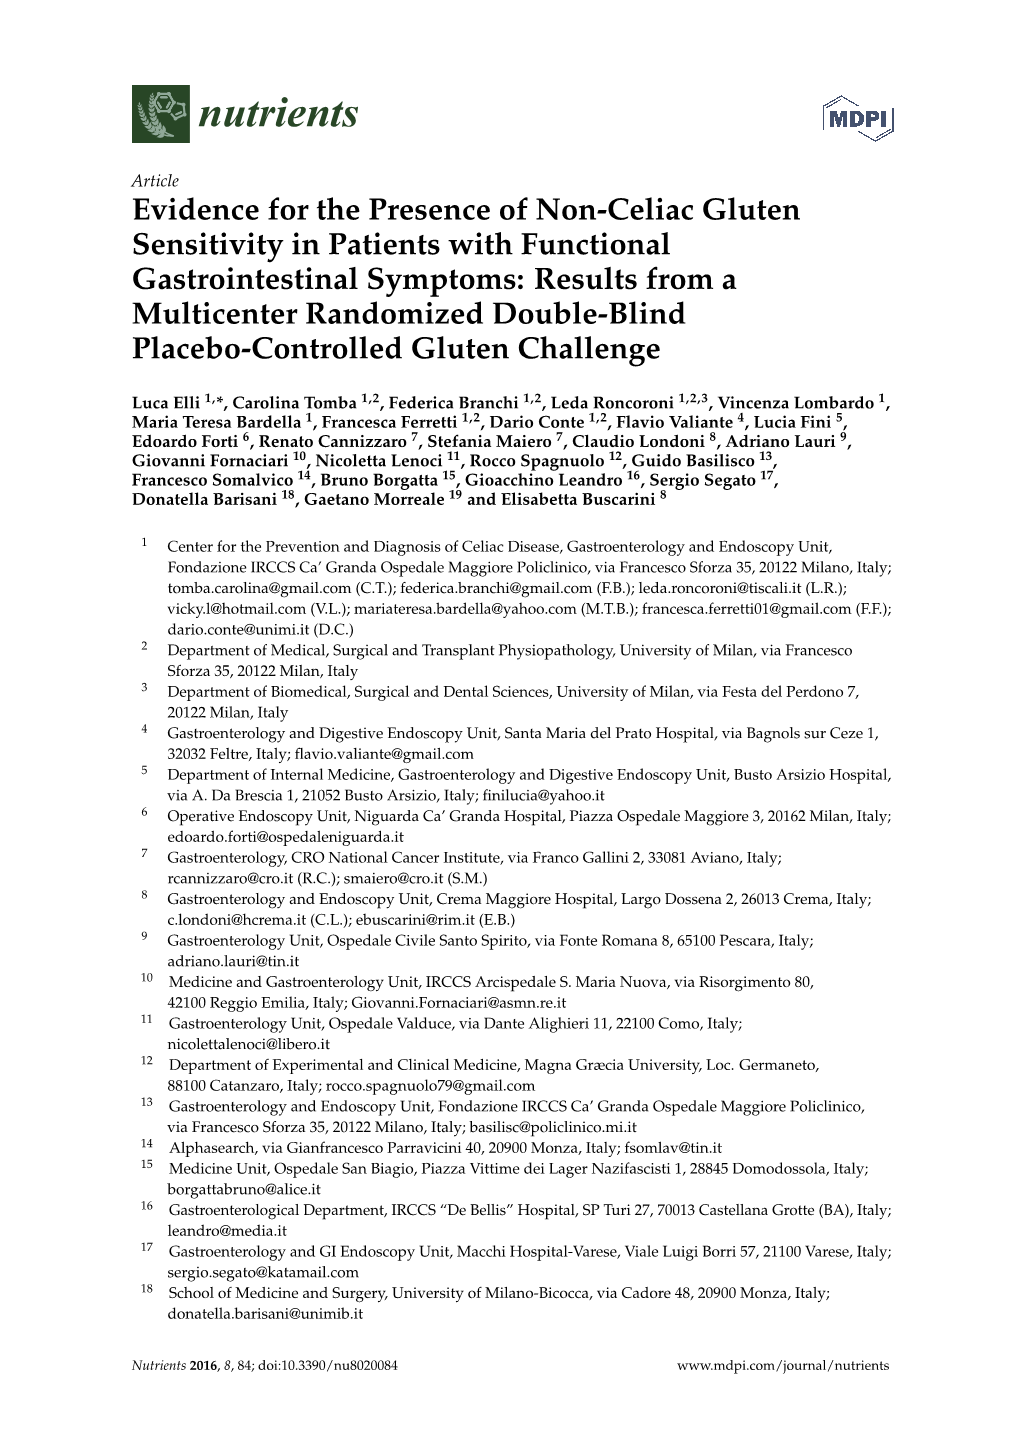 Evidence for the Presence of Non-Celiac Gluten Sensitivity in Patients with Functional Gastrointestinal Symptoms